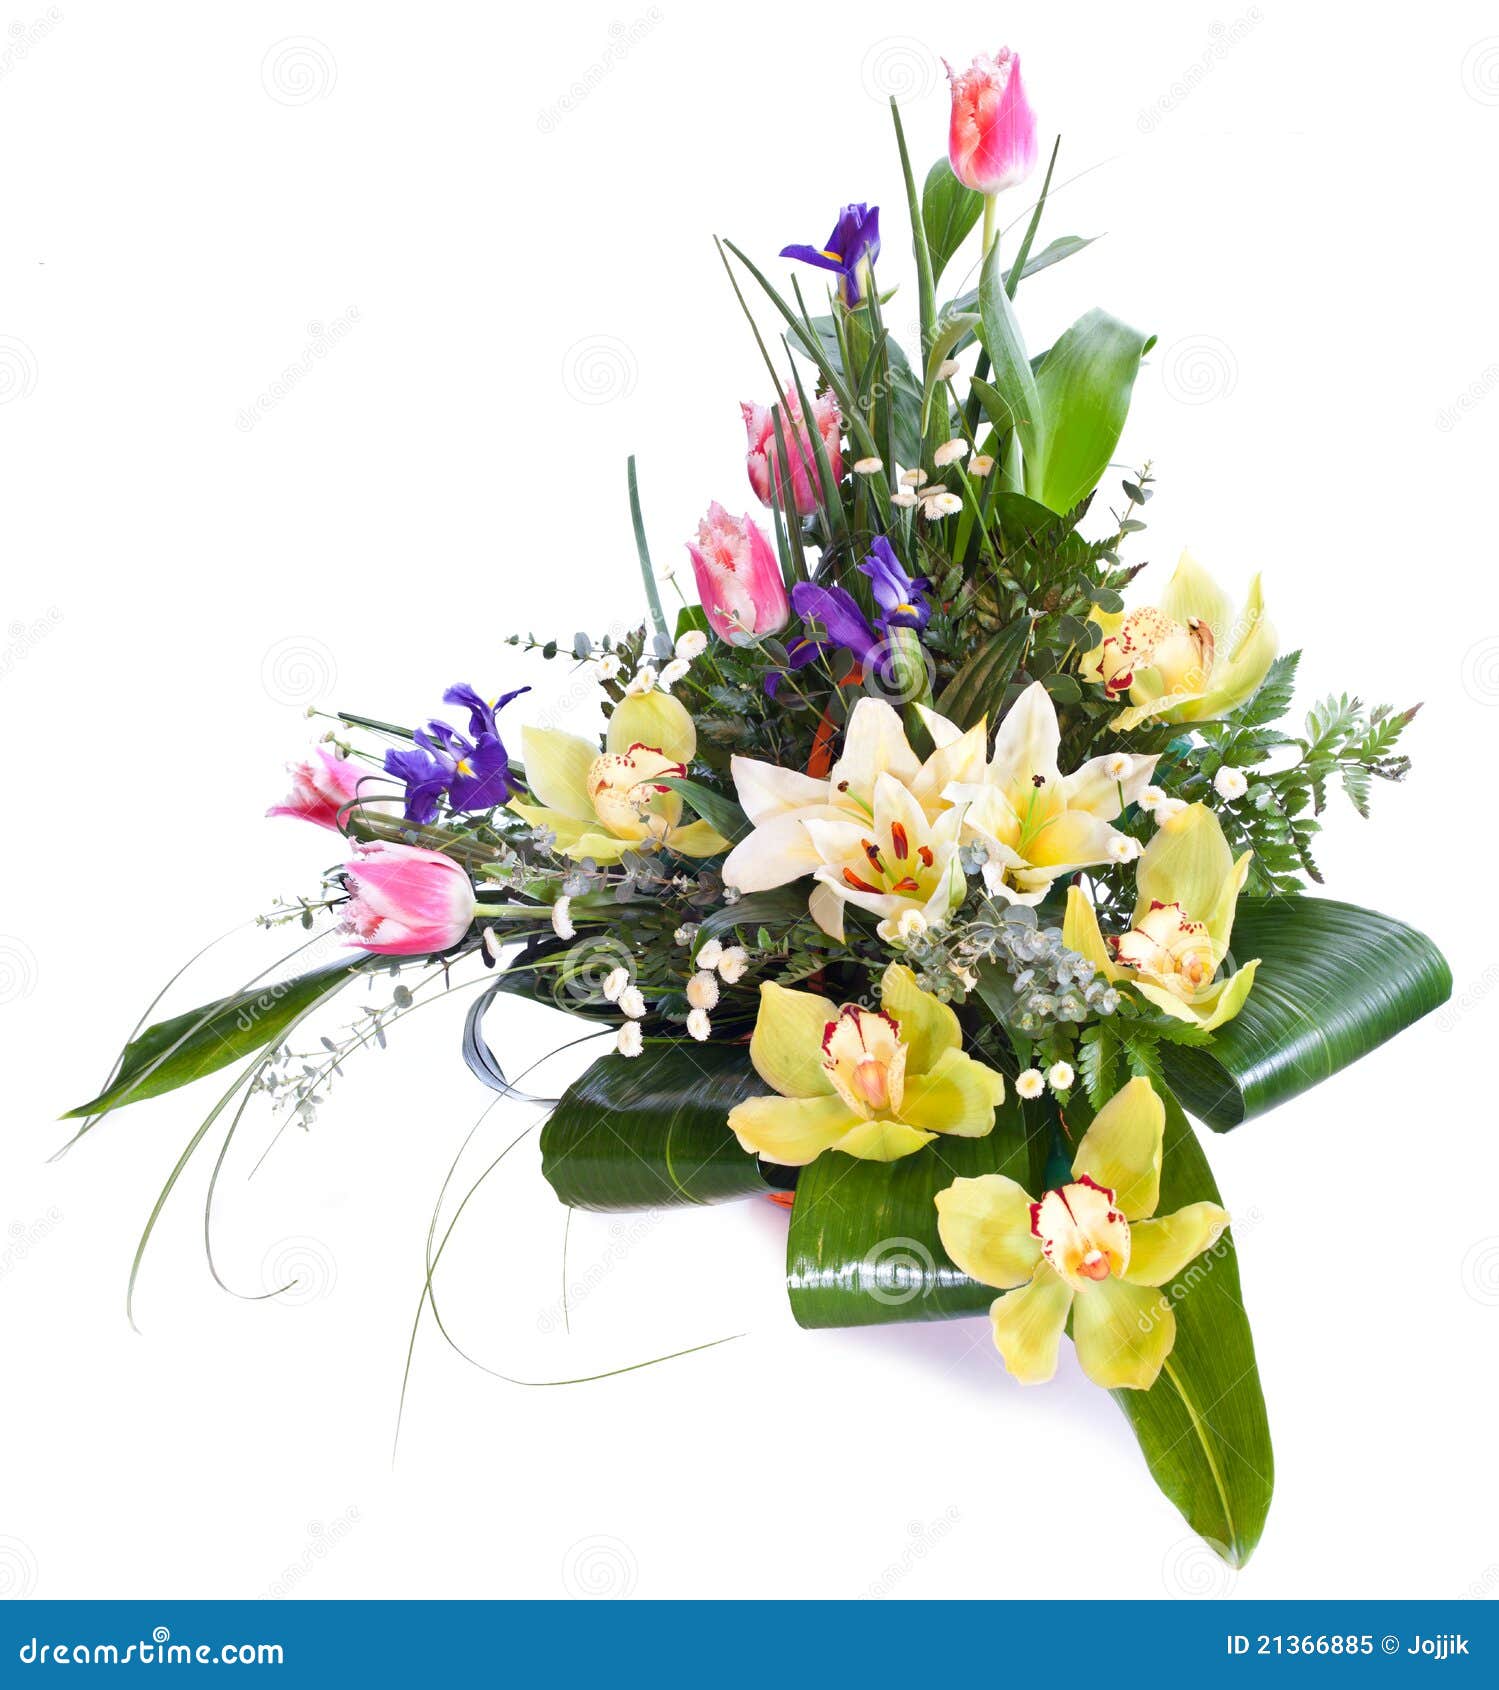 Bright flower bouquet stock image. Image of colorful - 21366885